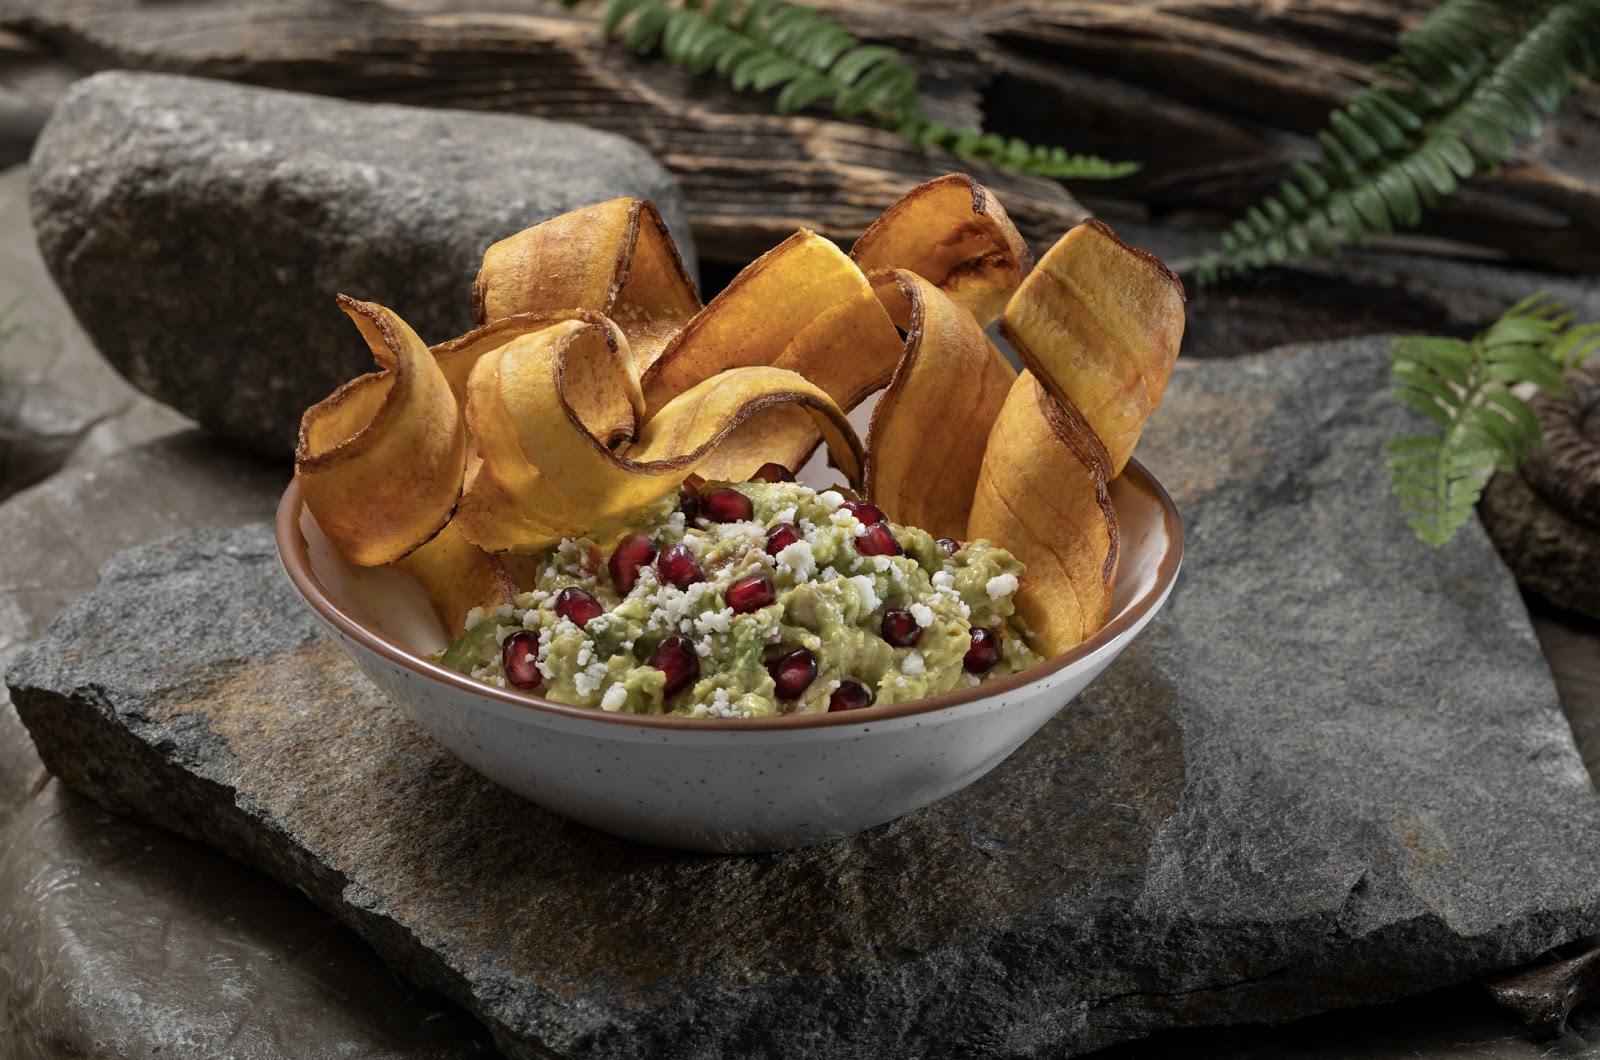 Take a First Look at New "Jurassic World" Food and Beverage at